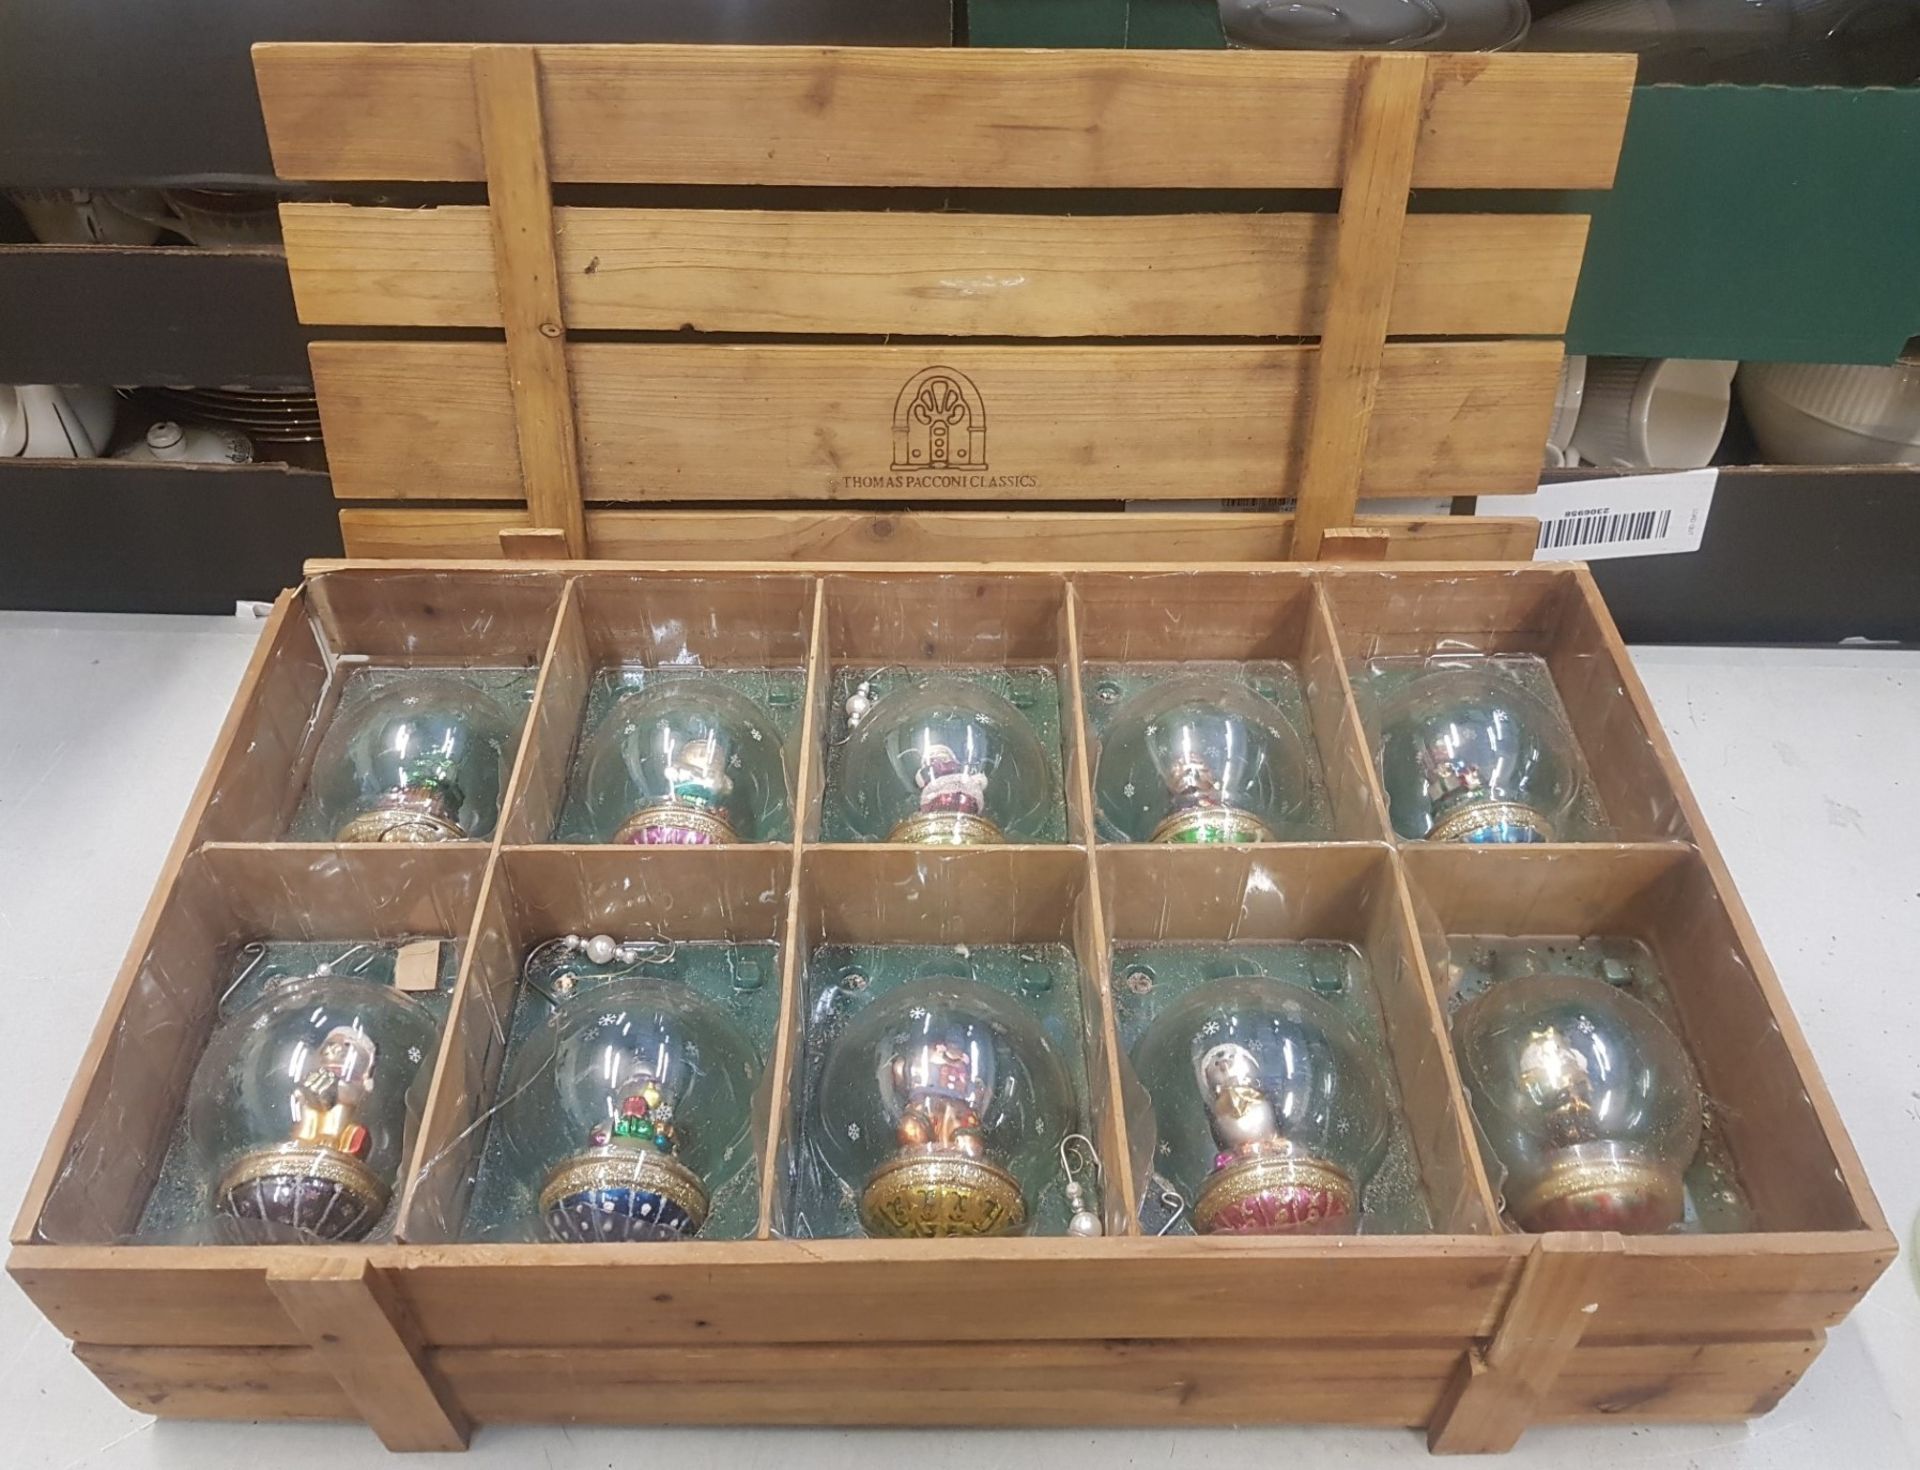 Thomas Pacconi classics hand blown glass christmas decorations set of 10 in original packaging